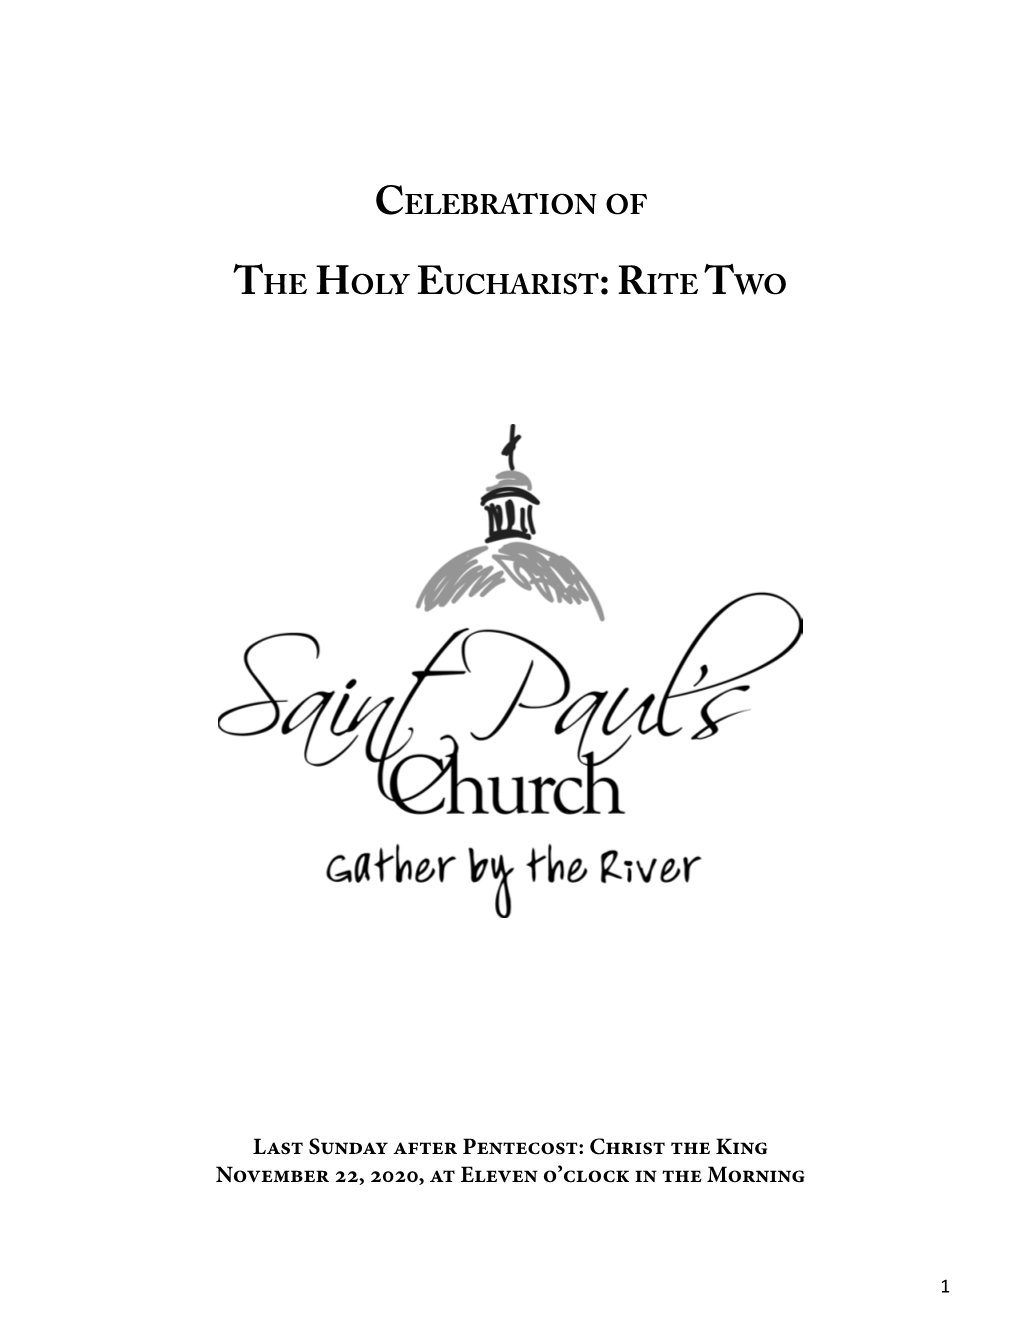 Celebration of the Holy Eucharist: Rite Two